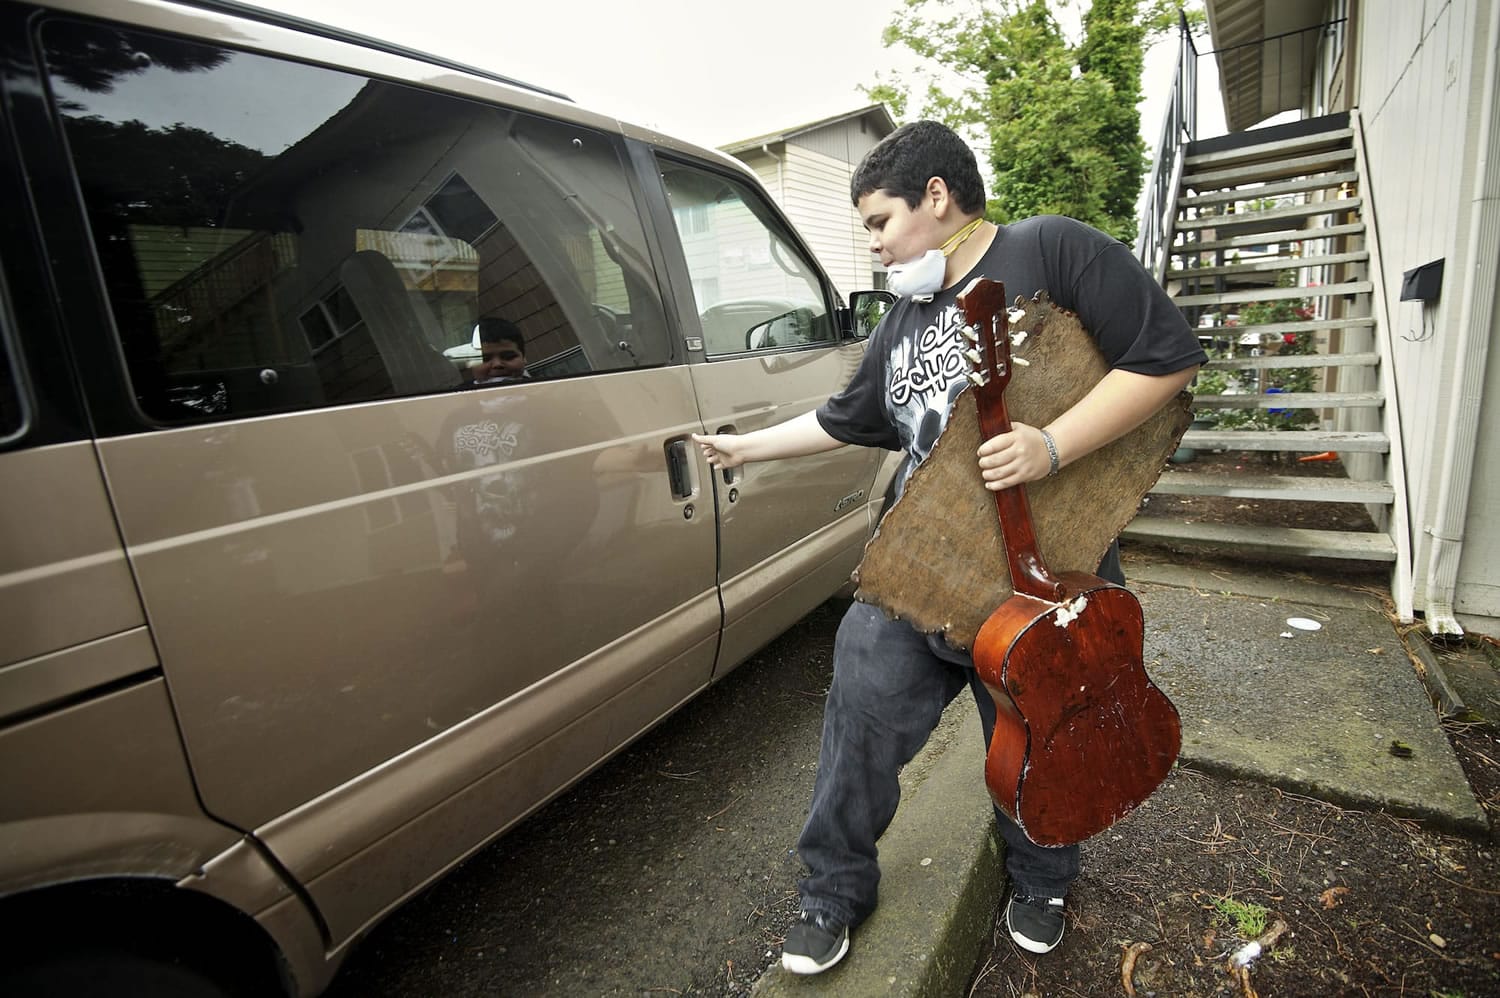 James Smith Jr., 13, loads cleaned items into a family van Thursday.